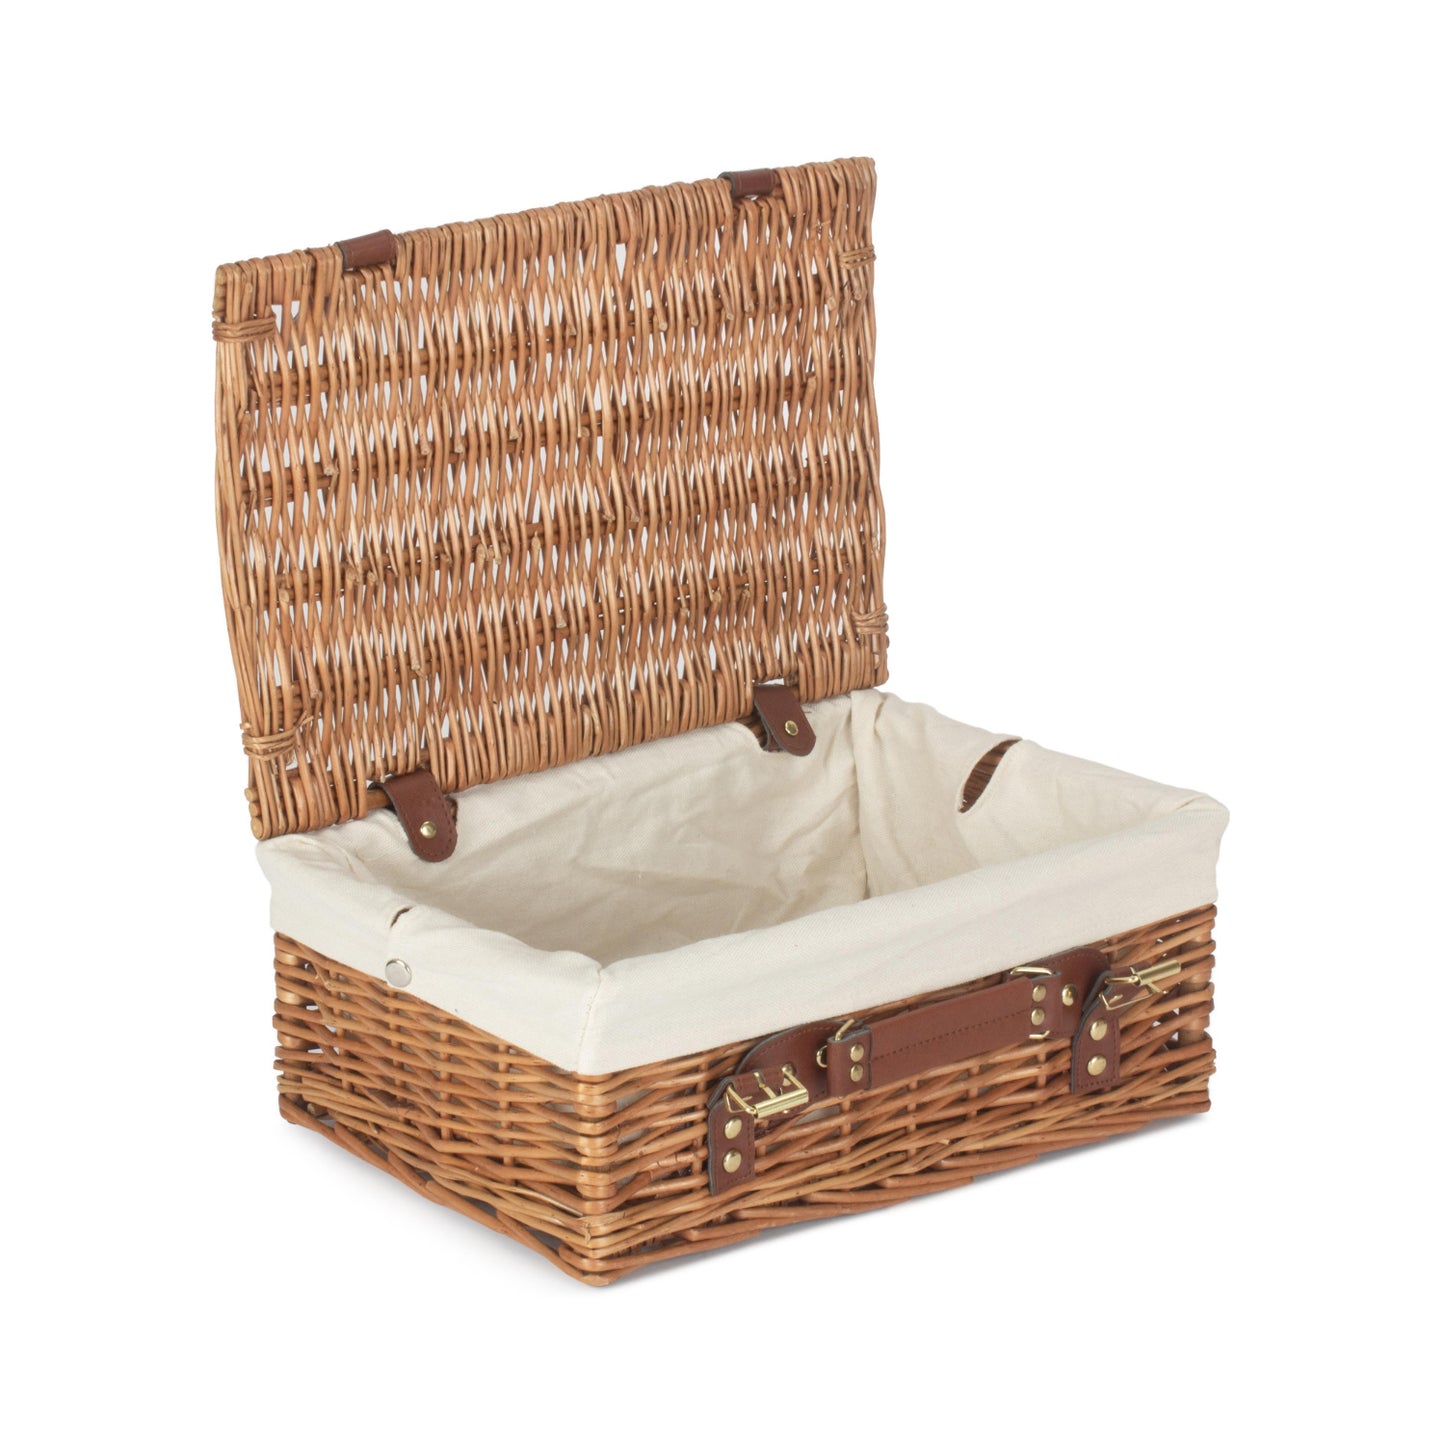 14 Inch Light Steamed Hamper With White Lining